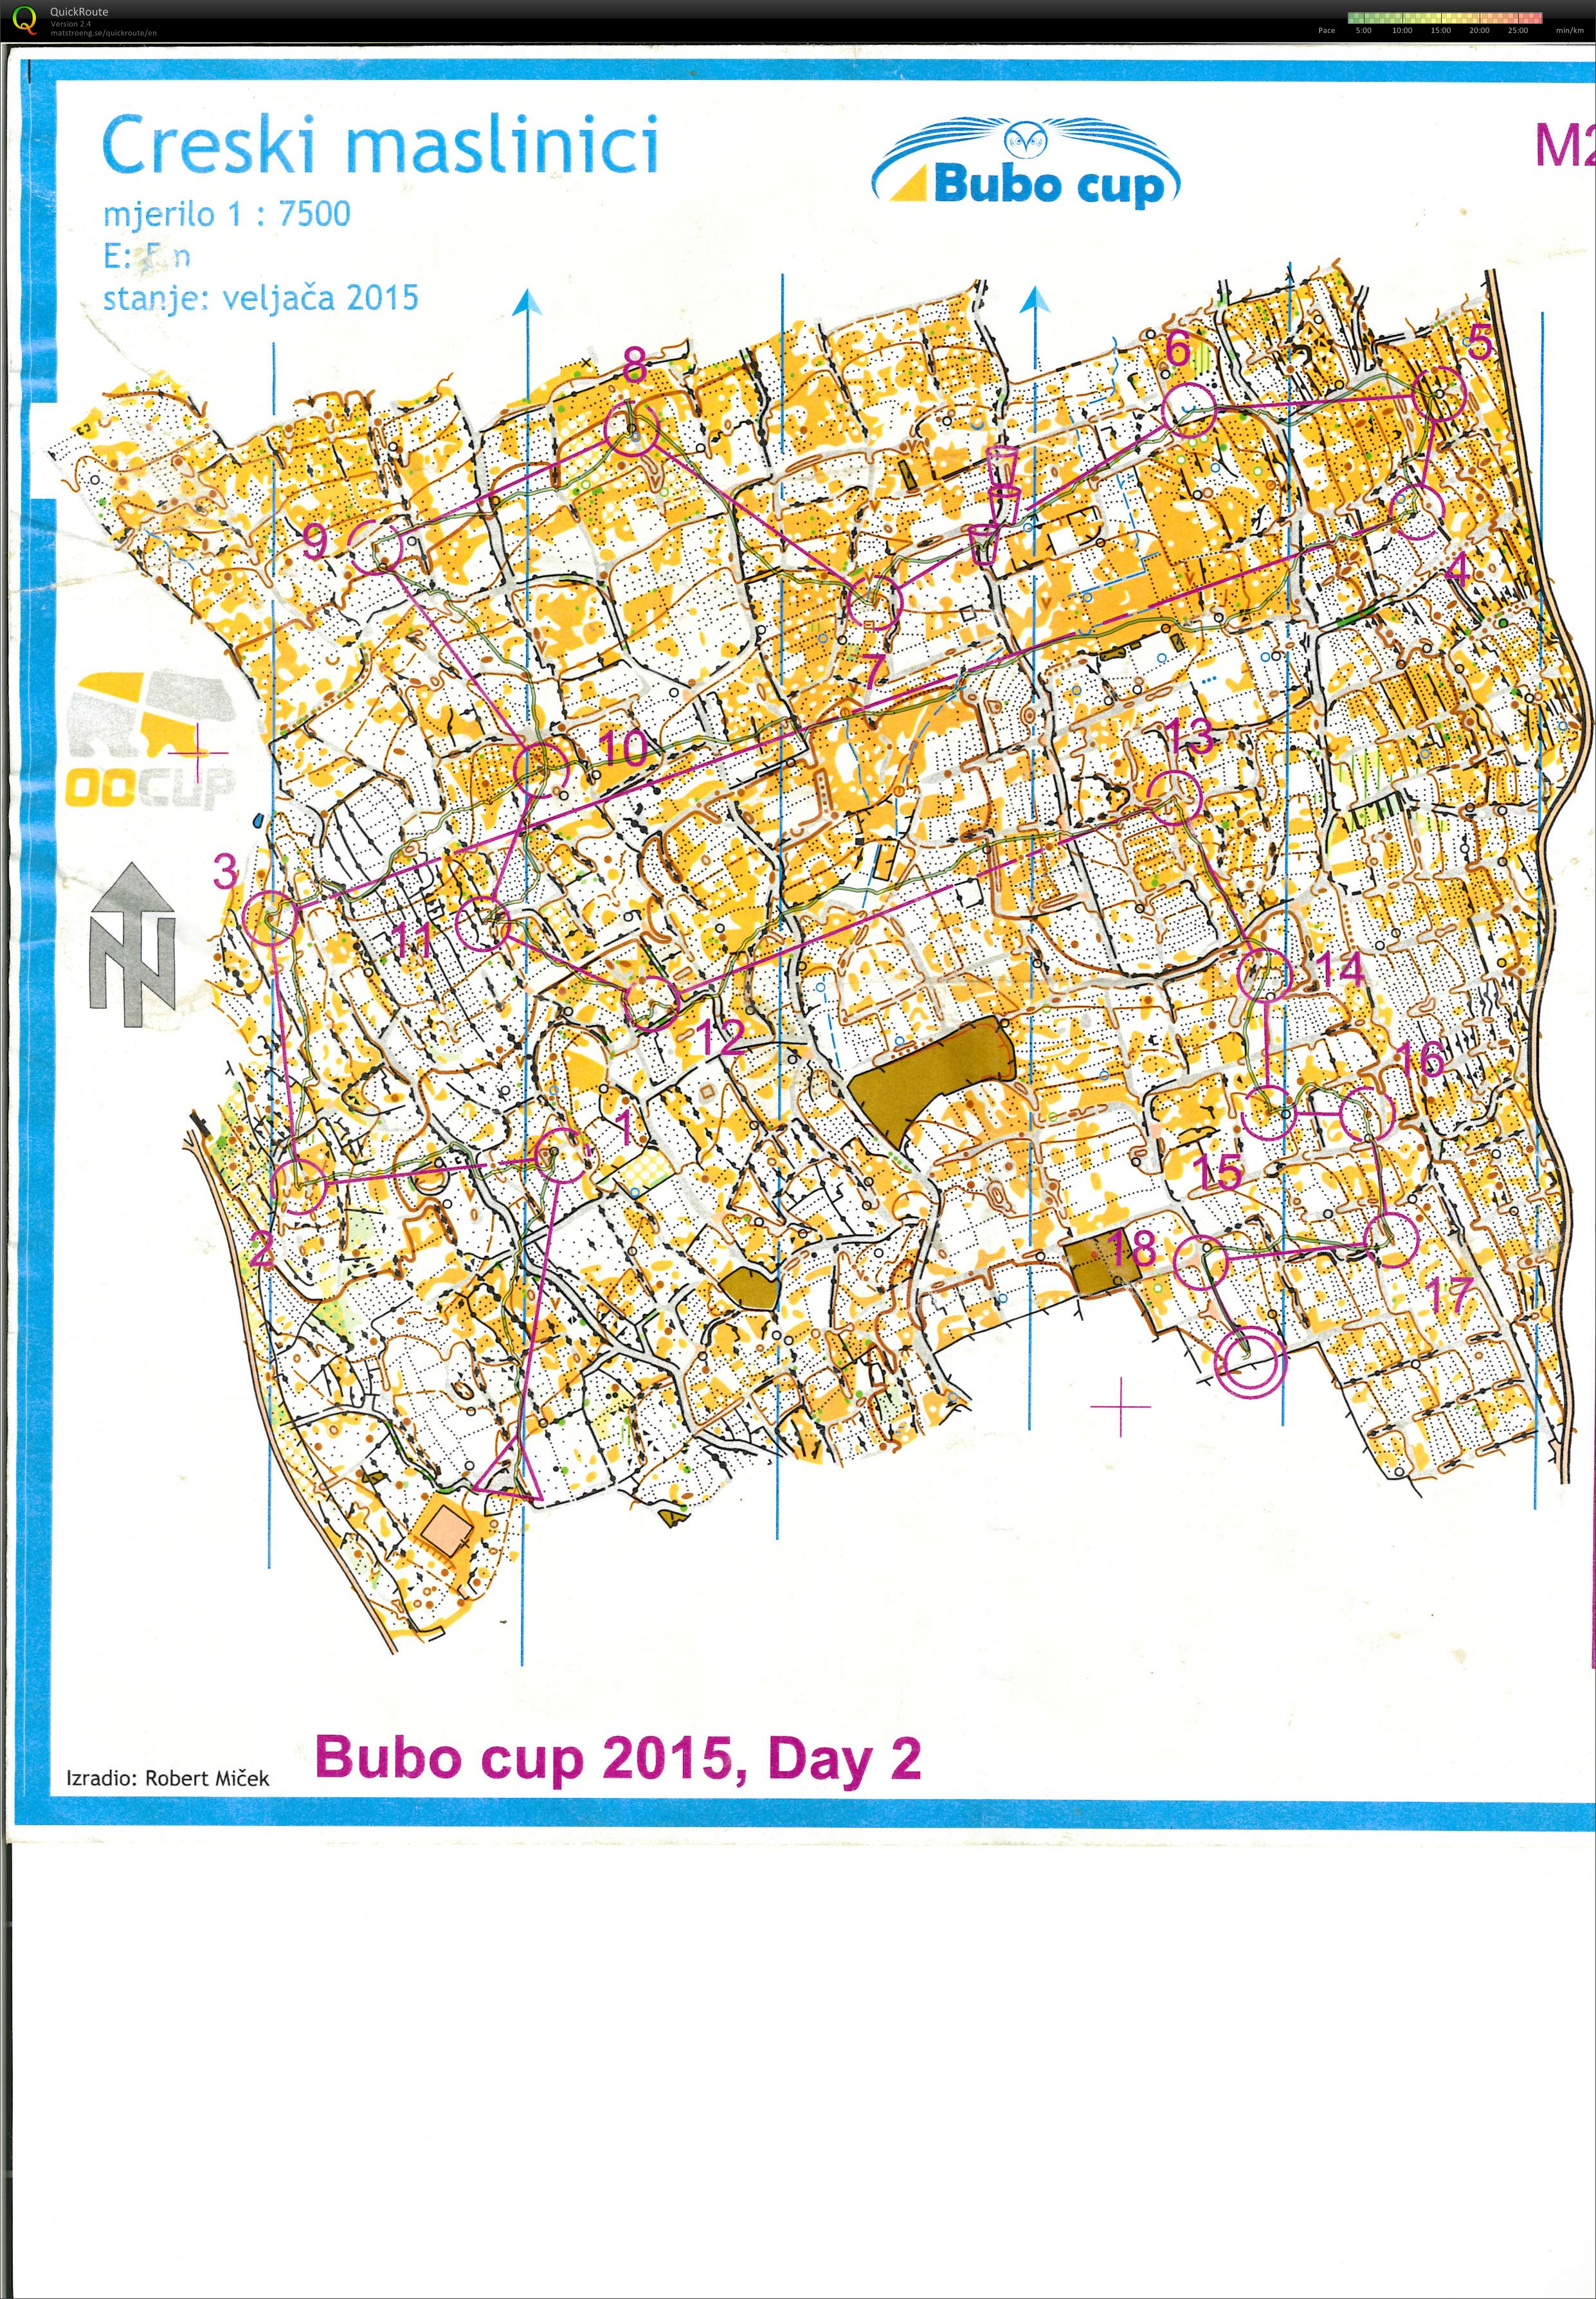 Bubocup 2015 Stage 2 (02.08.2015)